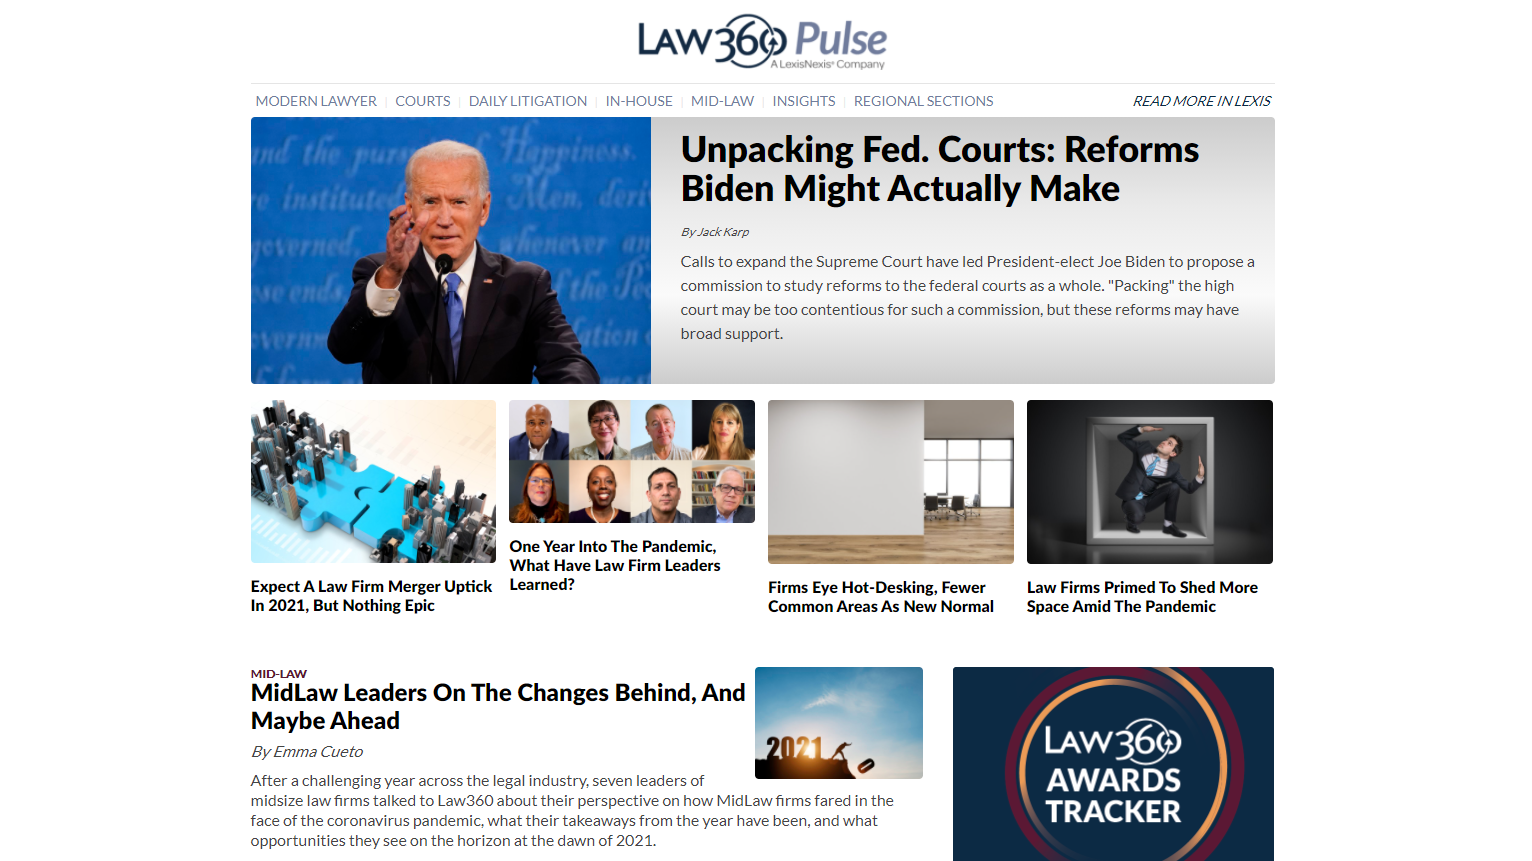 New &#8216;Law360 Pulse&#8217; From LexisNexis Combines Legal Journalism with Data and Analytics